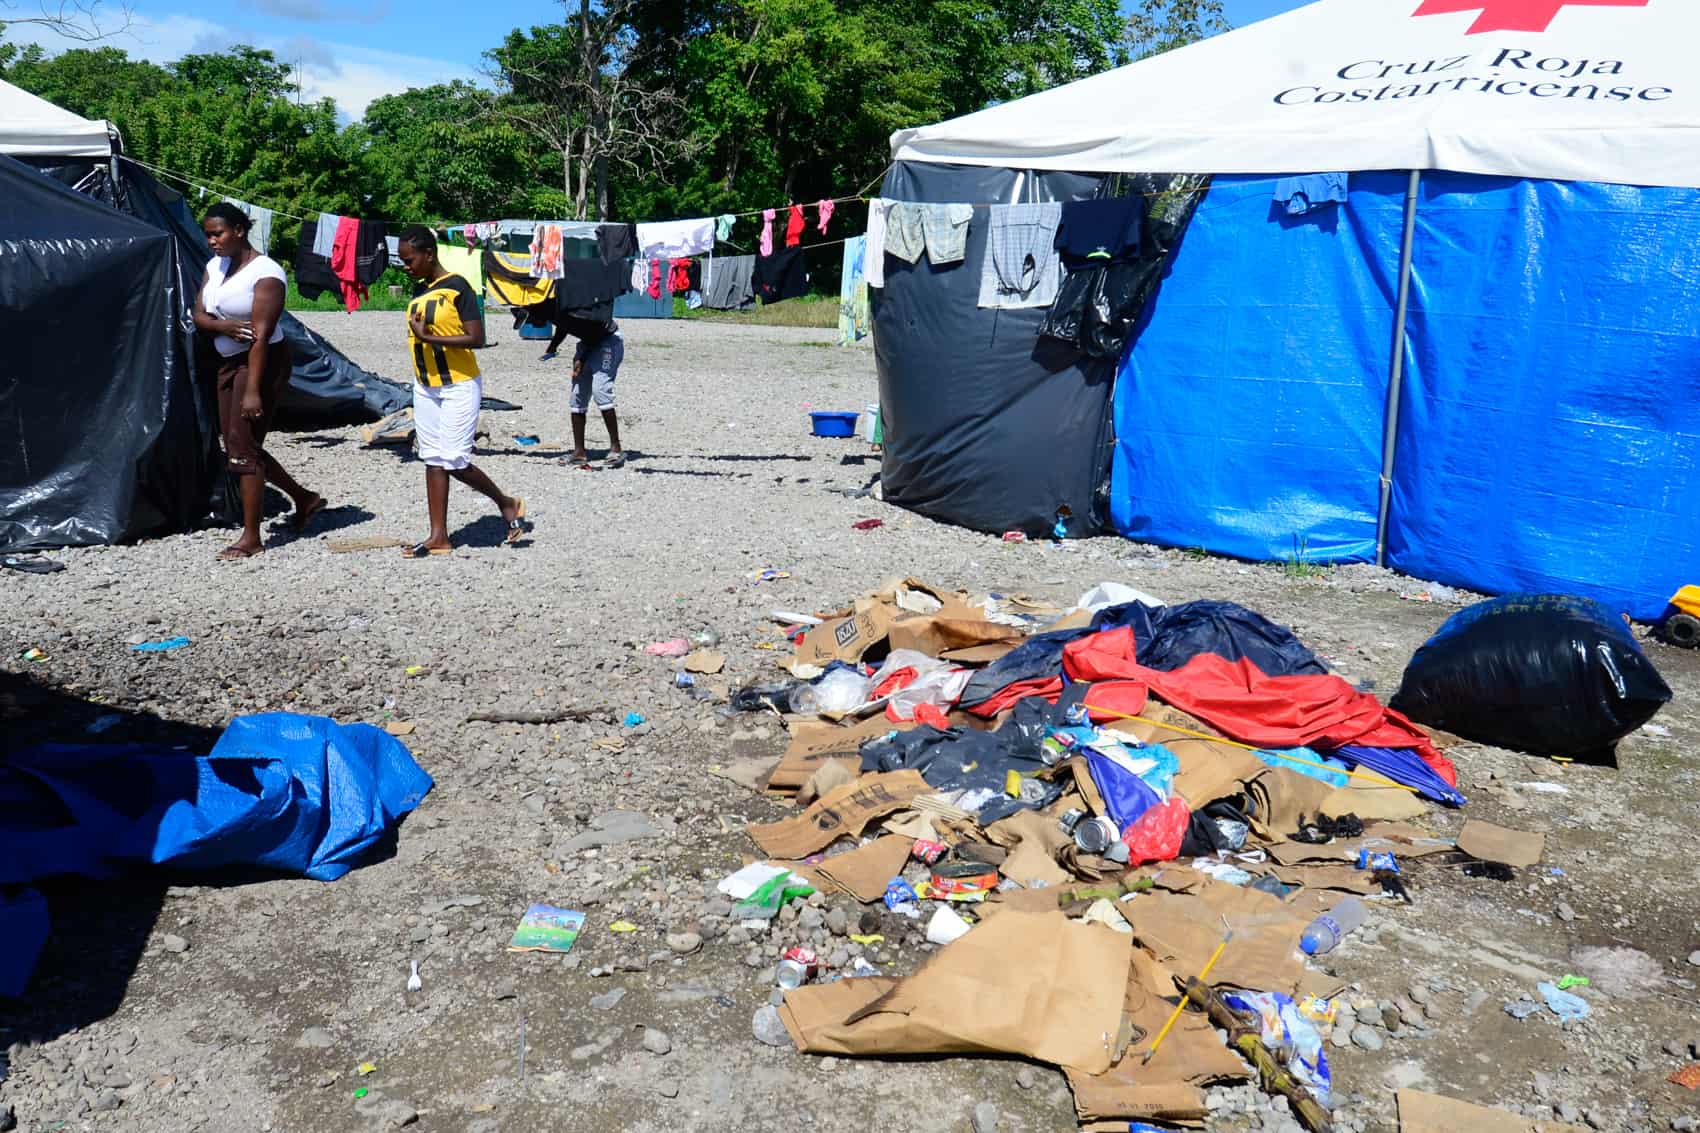 A pile of trash outside of tents.